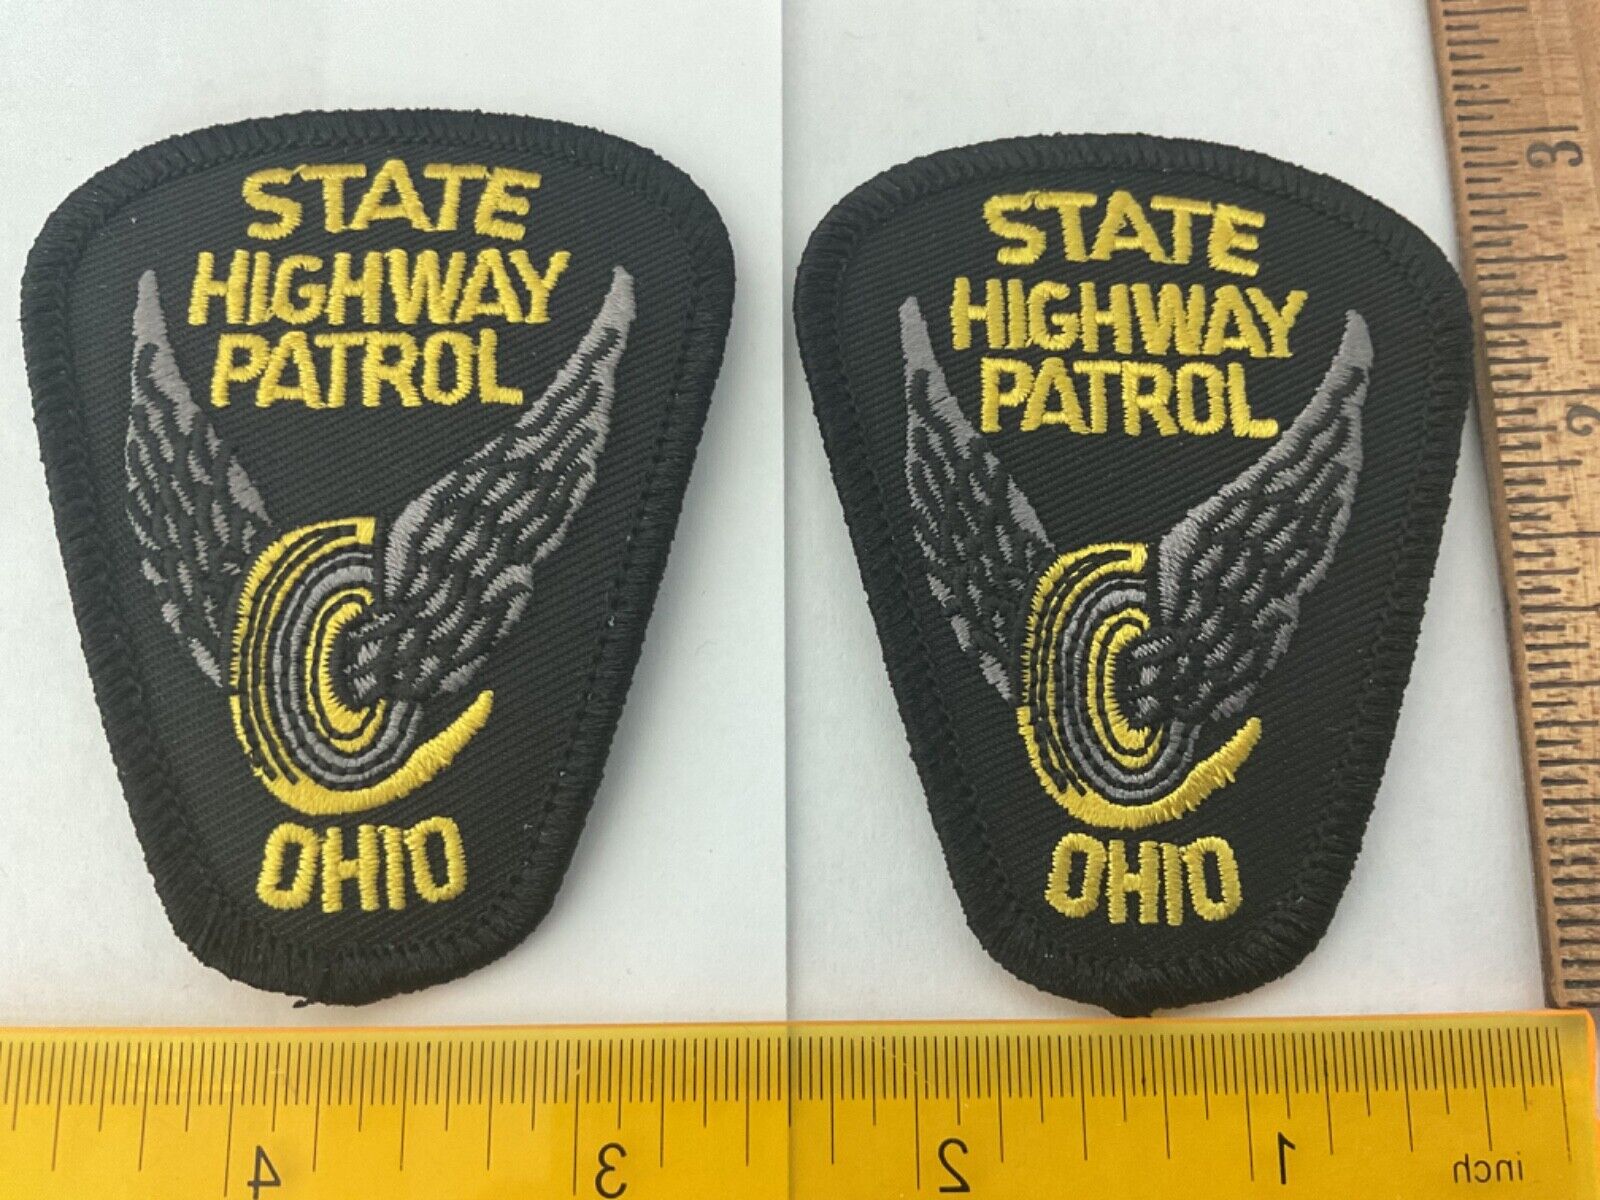 Ohio Highway Patrol collectors Hat patch set 2 pieces all new